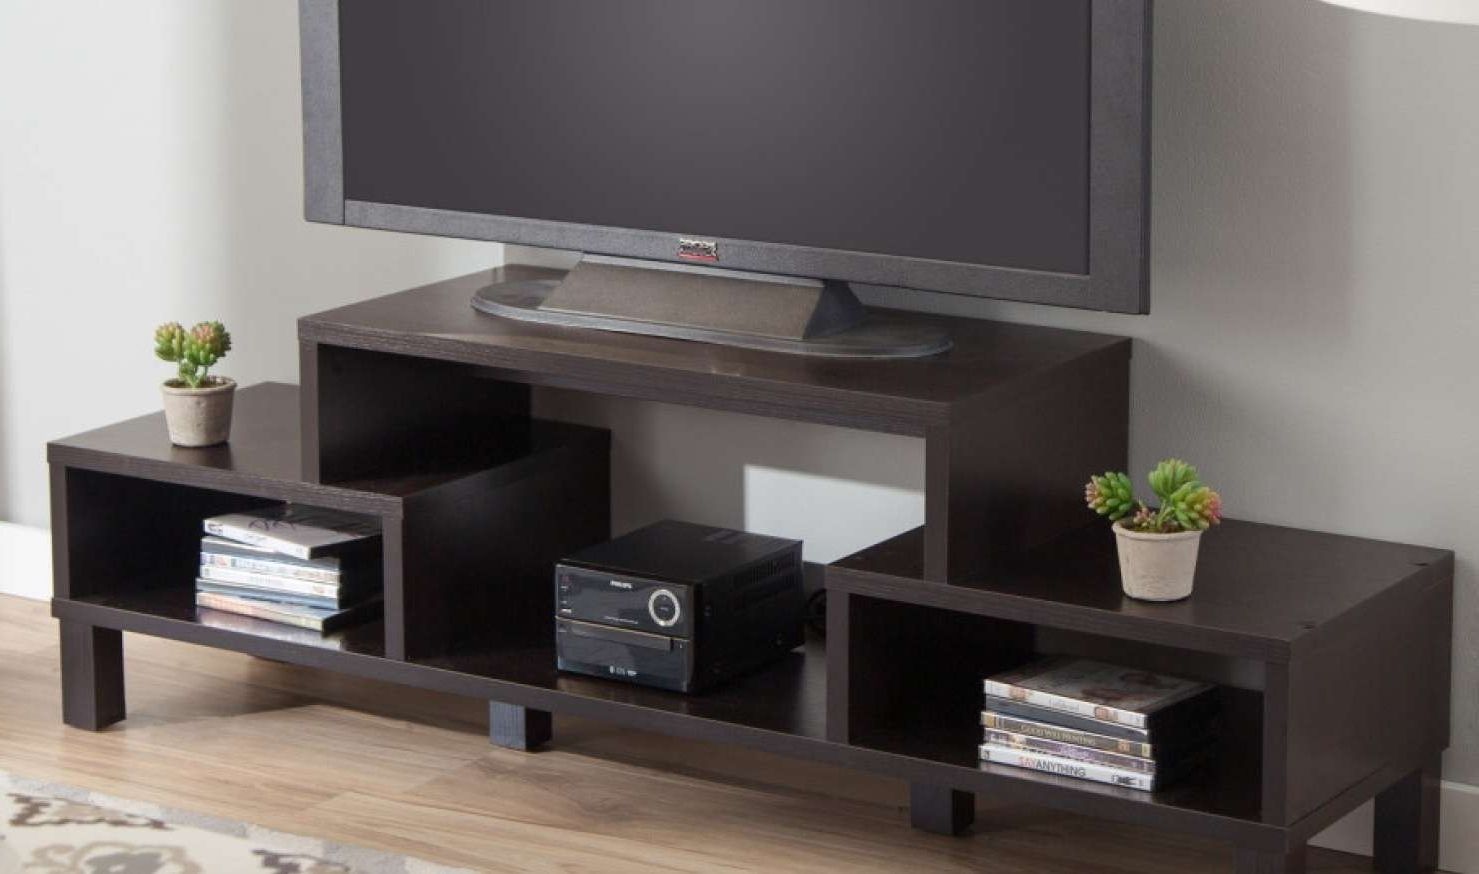 Widely Used Cheap Techlink Tv Stands Within Find Out Full Gallery Of Lovely Techlink Opod Tv Stand – Displaying (View 19 of 20)